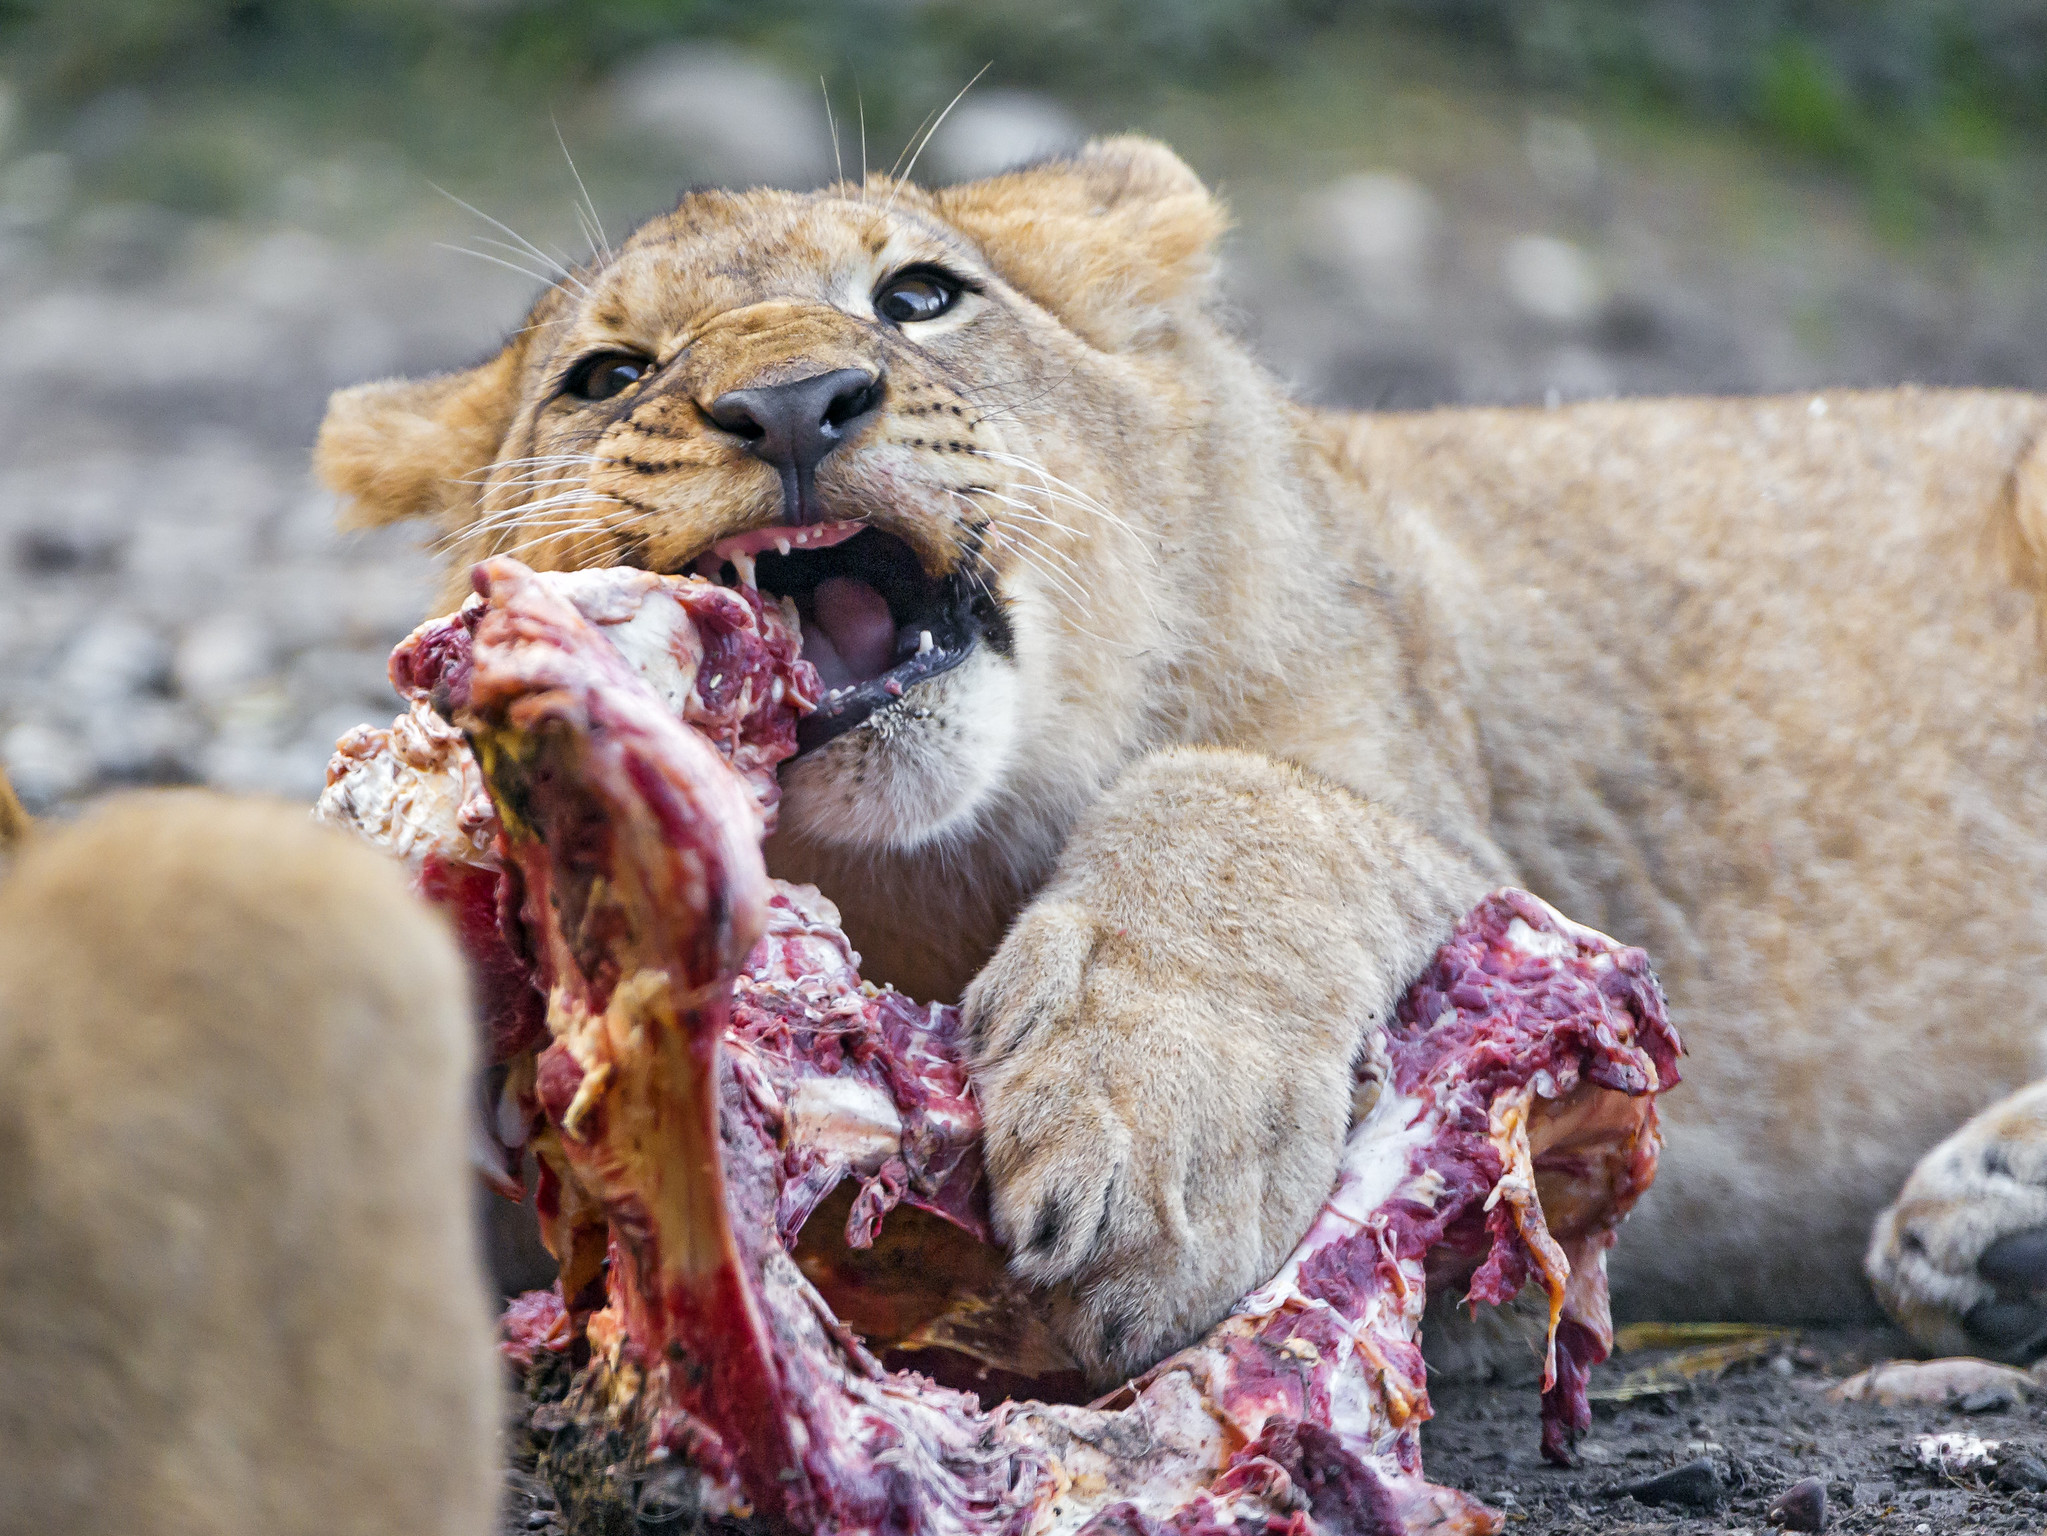 Lion eating carcass after attack